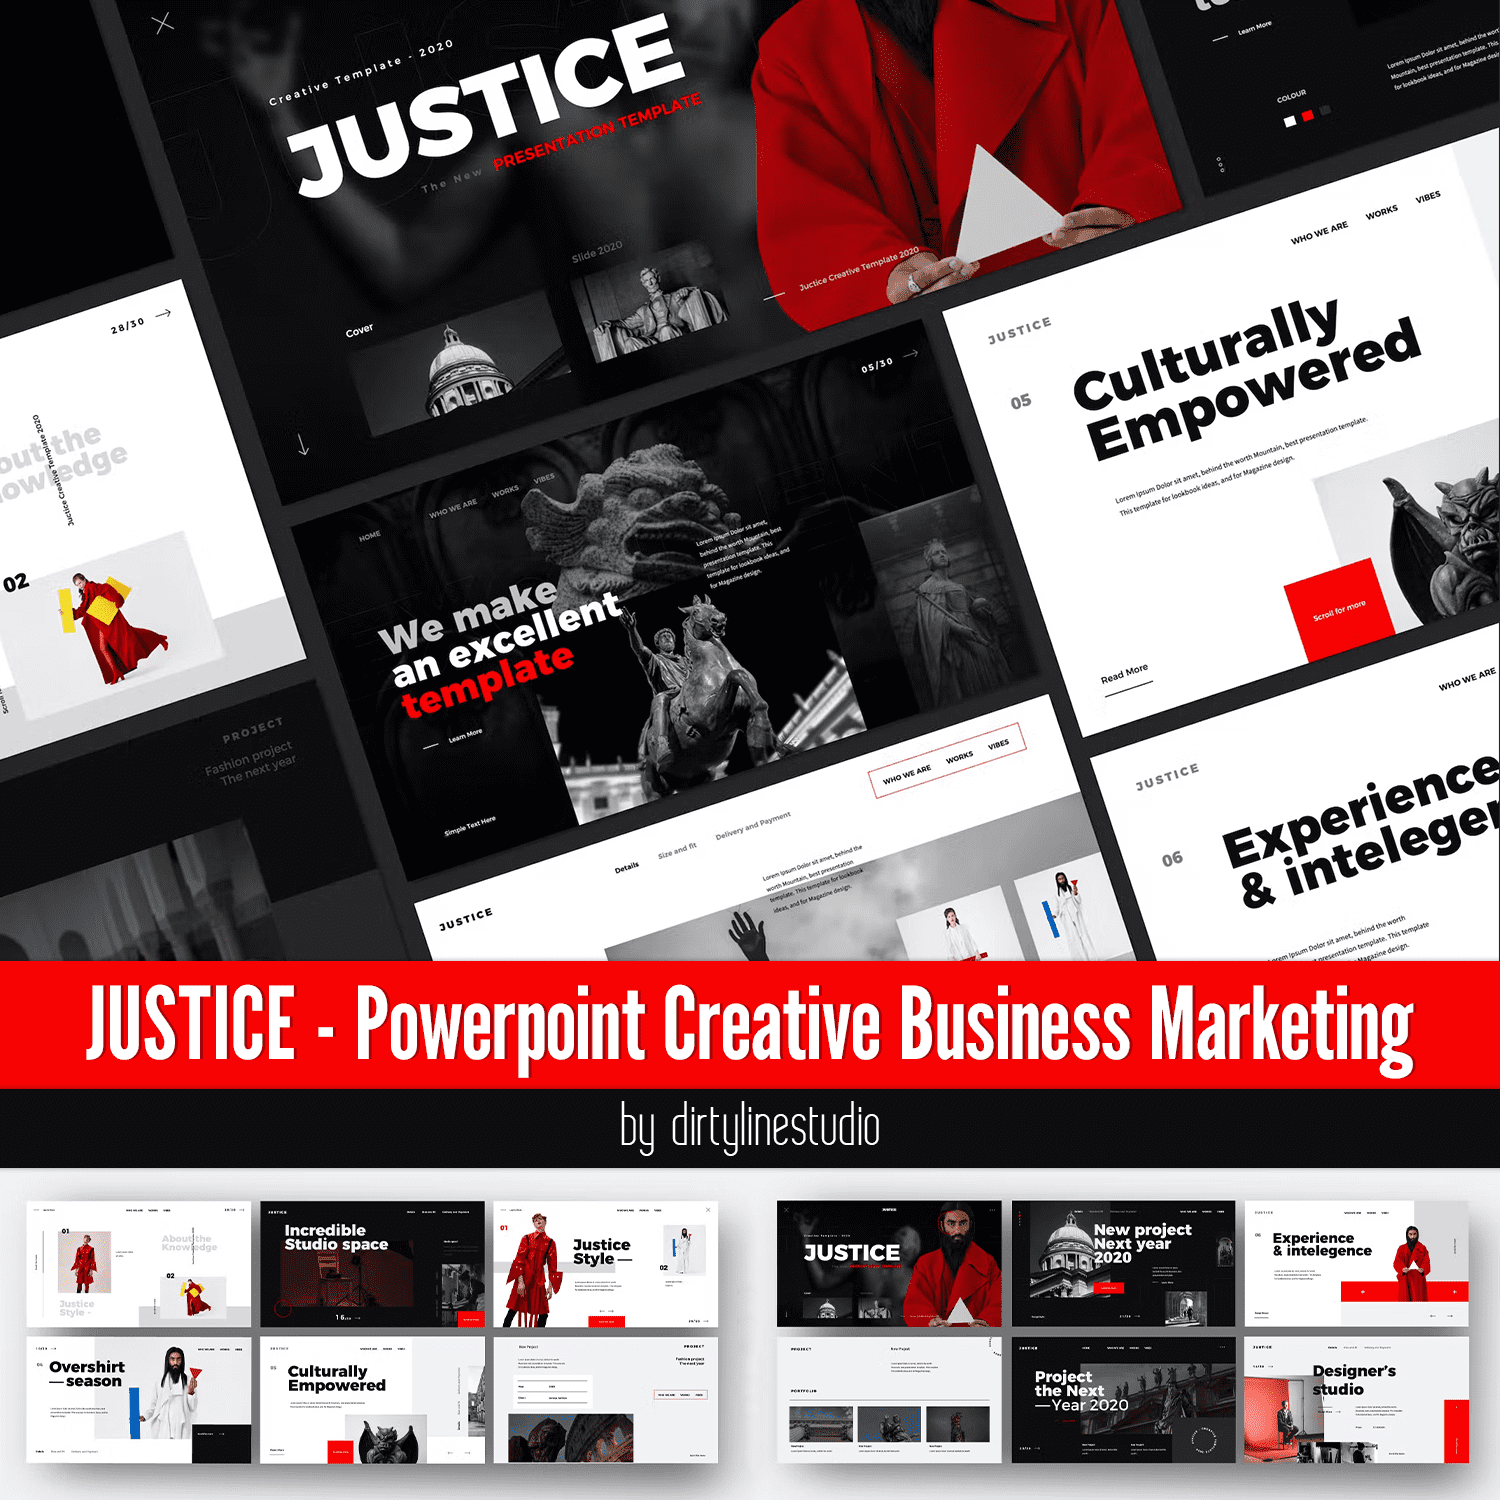 Prints of justice powerpoint creative business marketing.